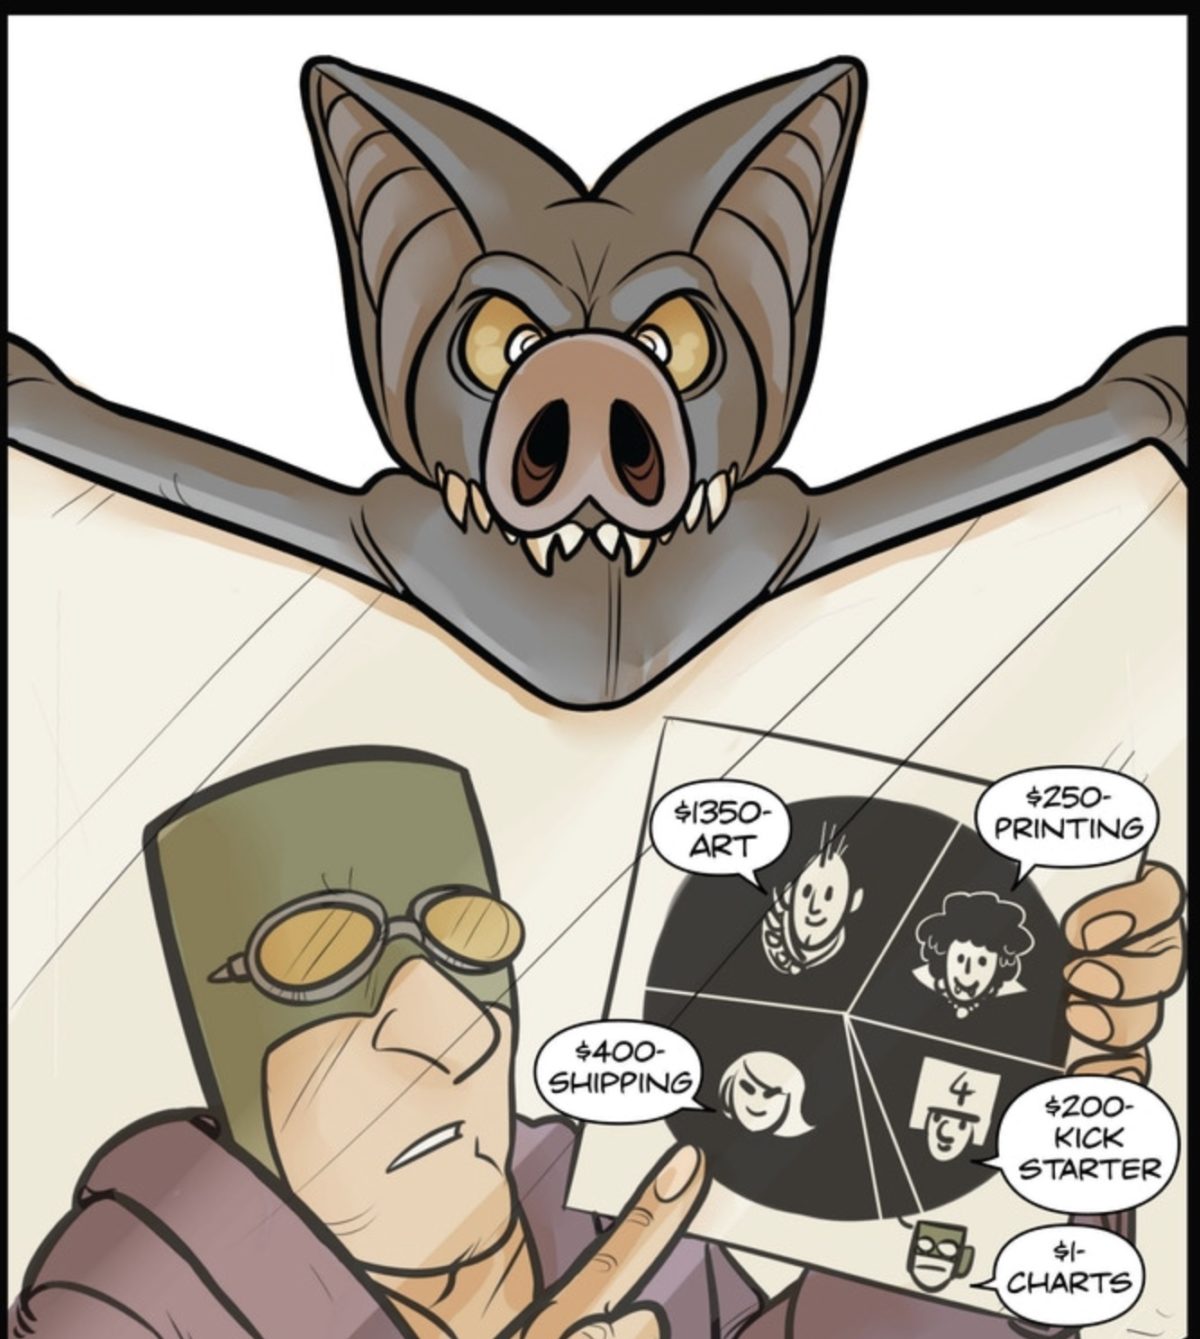 The Guano Guy Comic #2.5 (all-ages, superhero, comedy) Guano Guy is 20 pages of full-color, hilarious superhero adventures about marketing, promotion, and social-media fame.